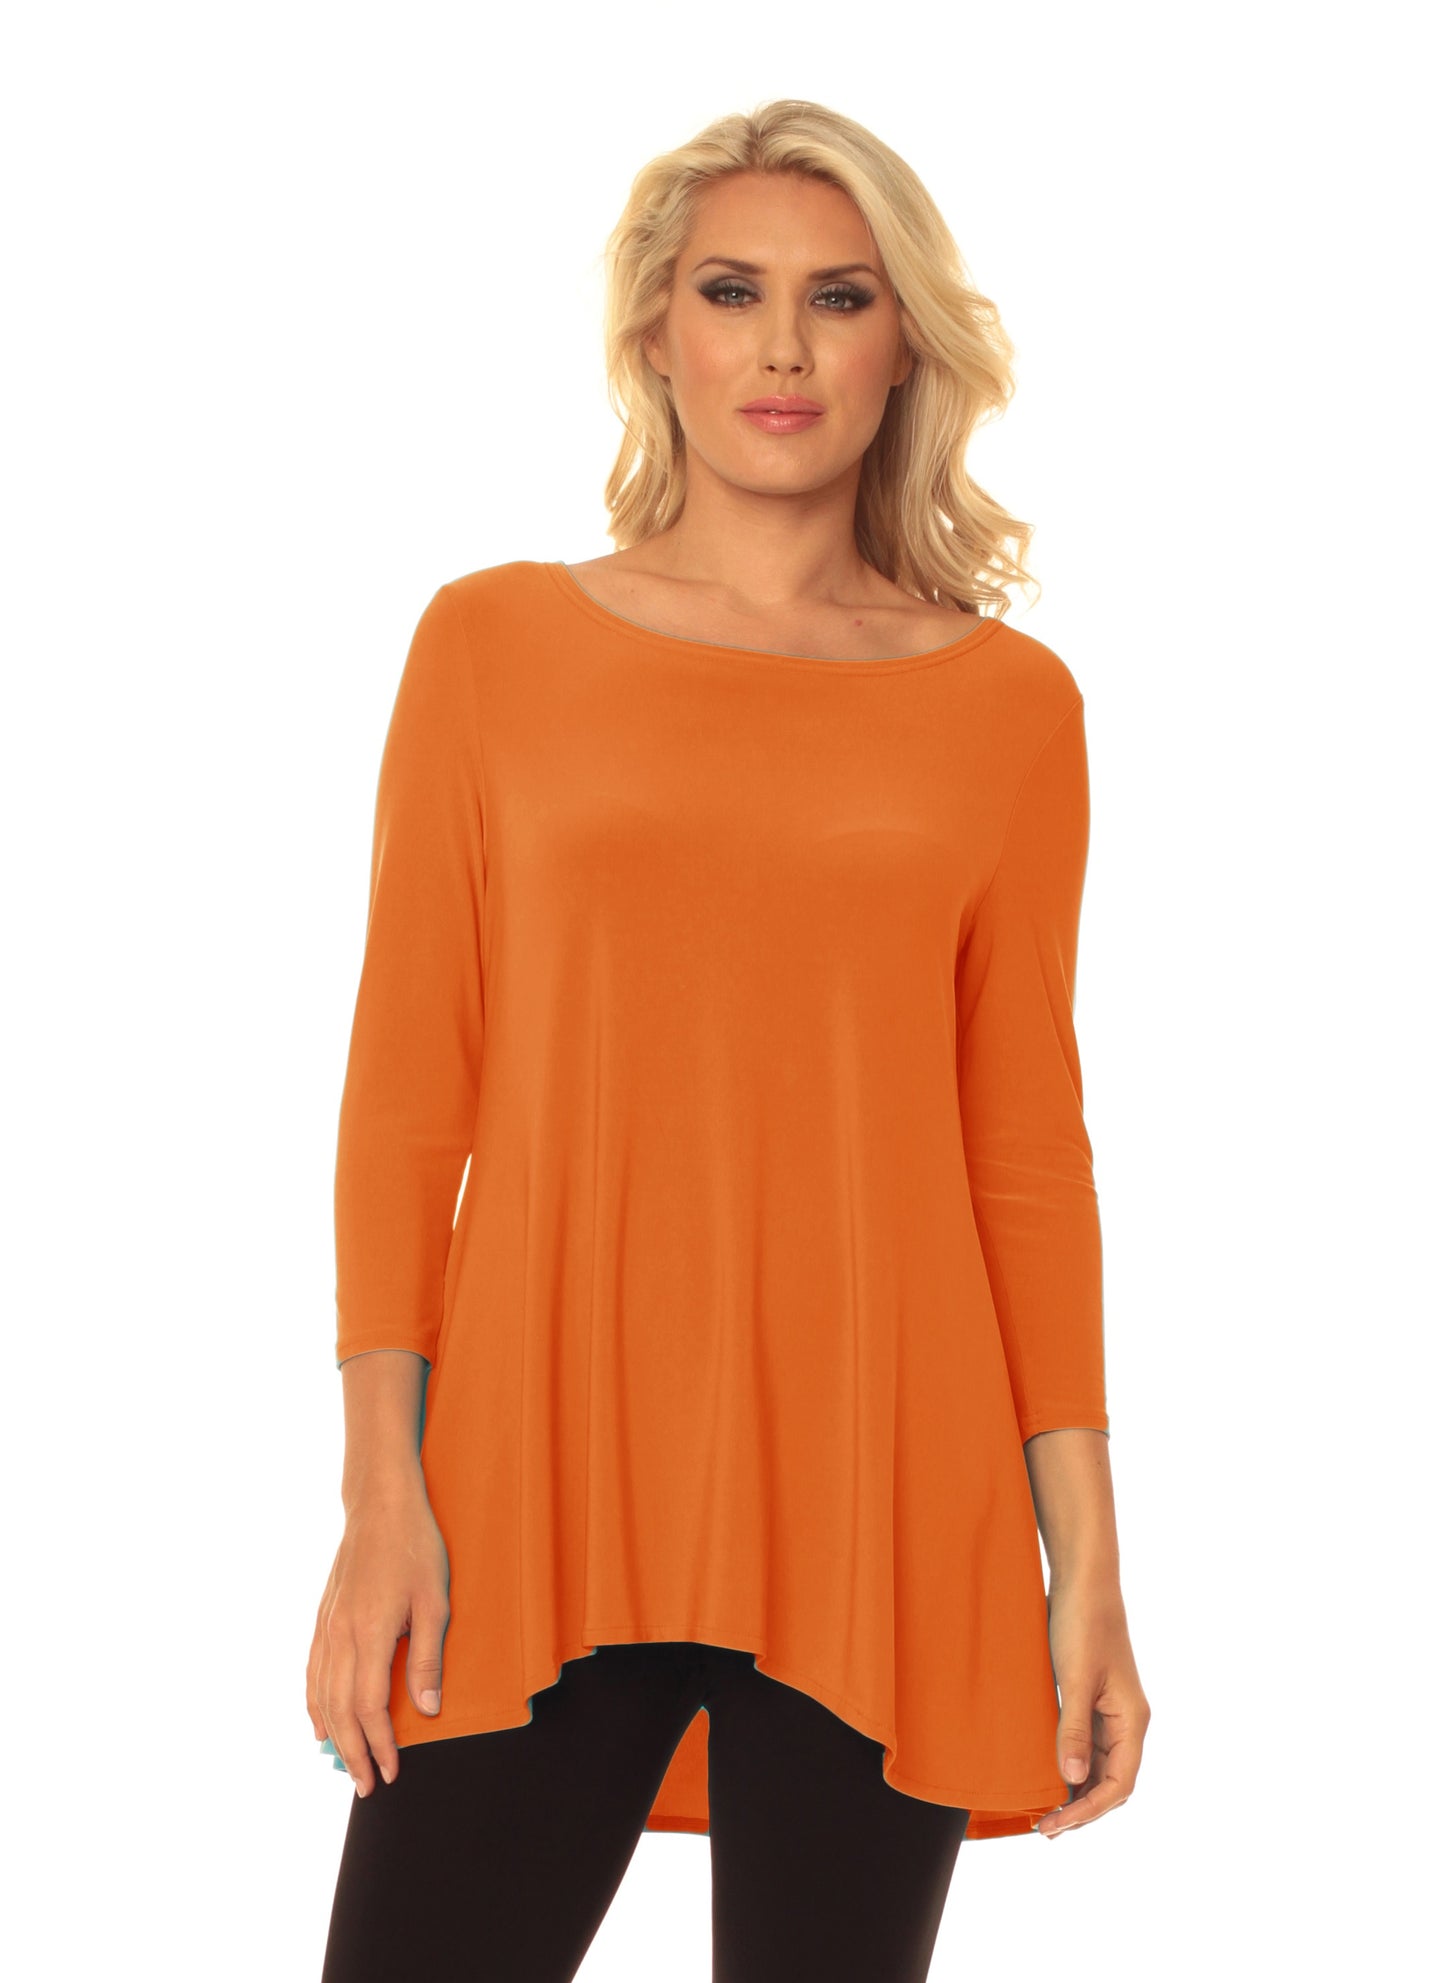 Women's High Low Tunic For Leggings - Bright Colors